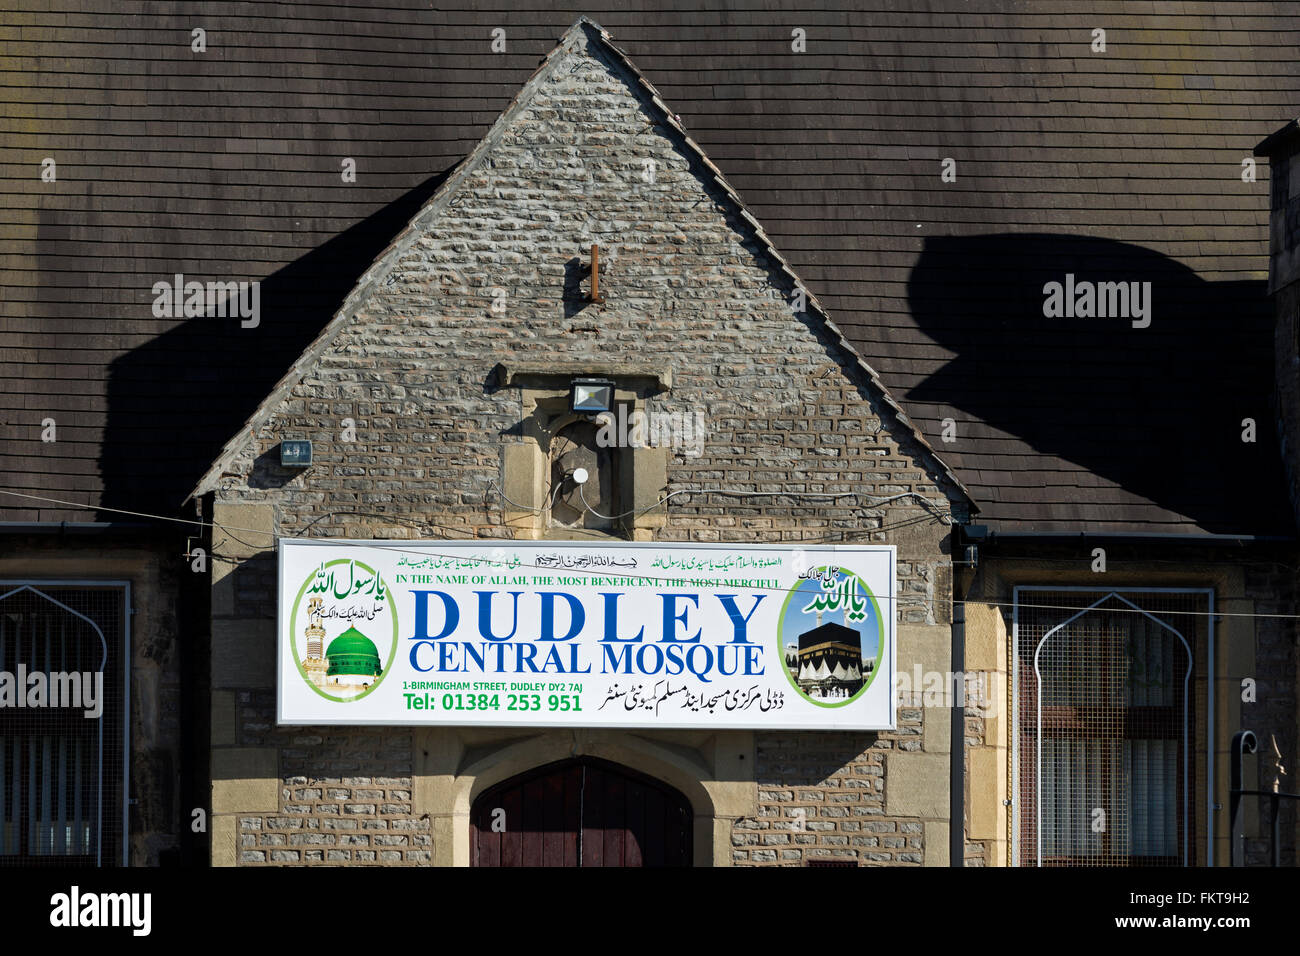 Dudley Central Mosque, West Midlands, England, UK Stock Photo